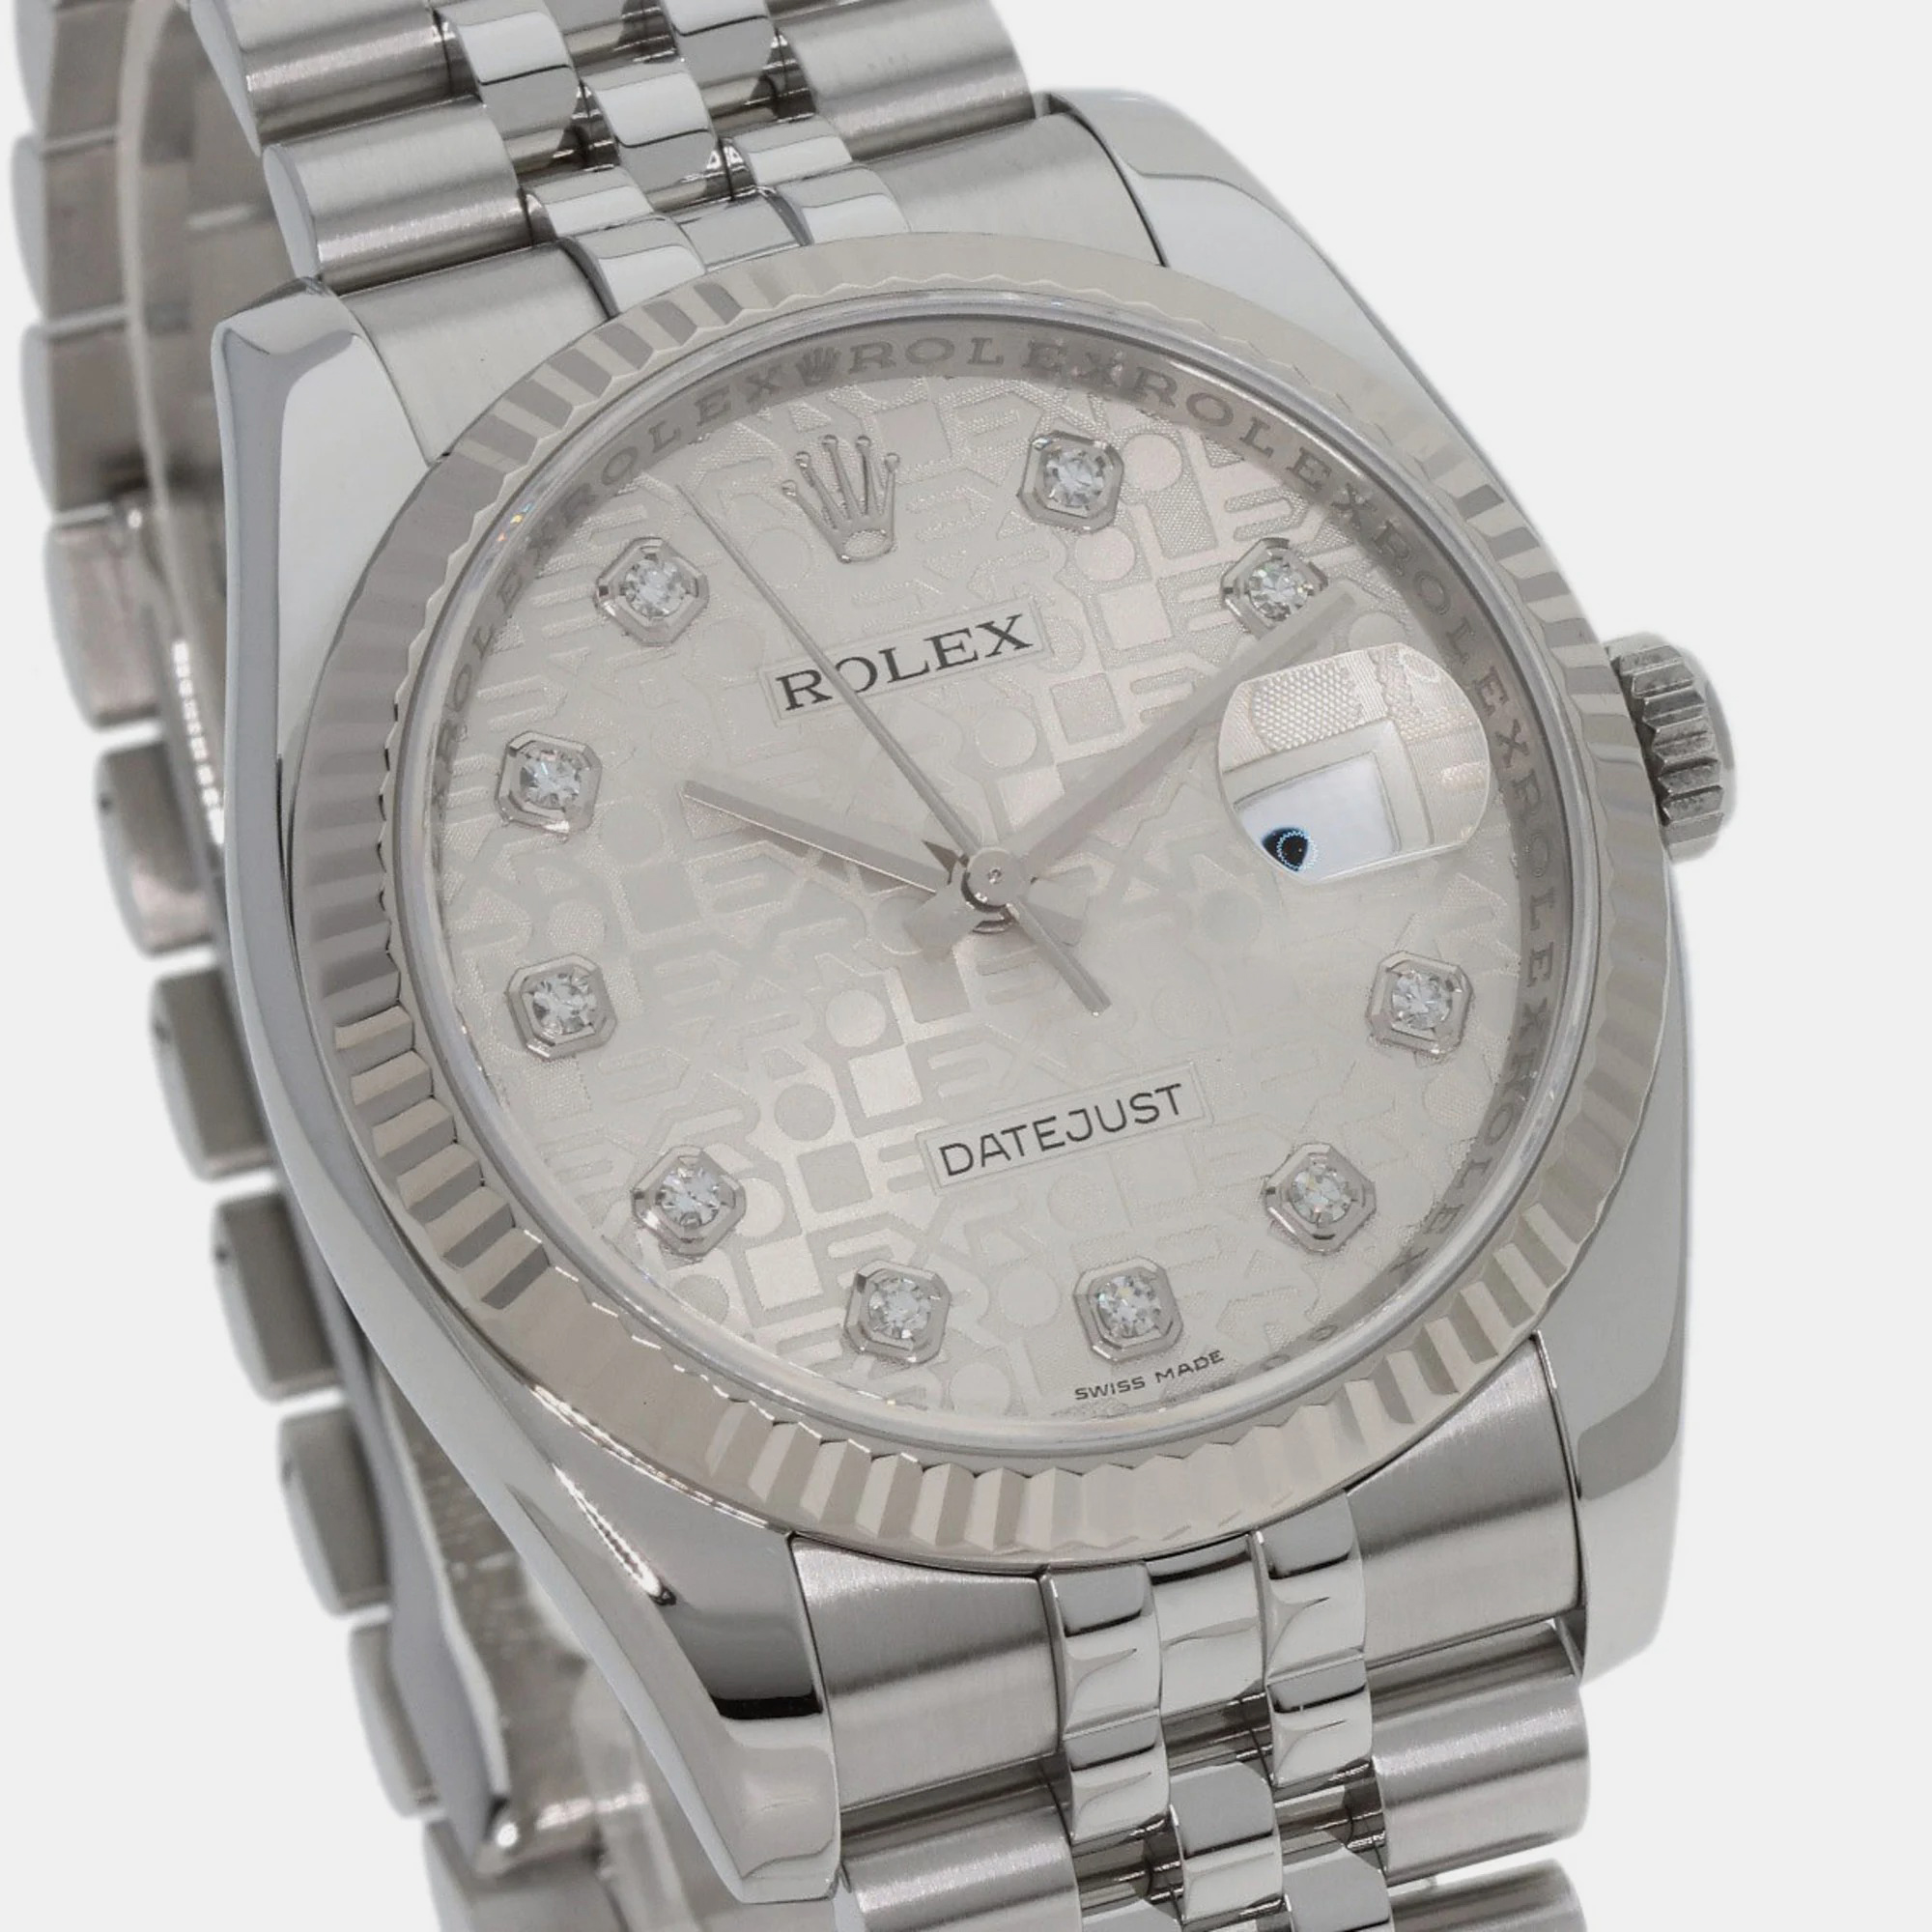 Rolex Silver Diamond 18k White Gold And Stainless Steel Datejust 116234 Automatic Men's Wristwatch 36 Mm